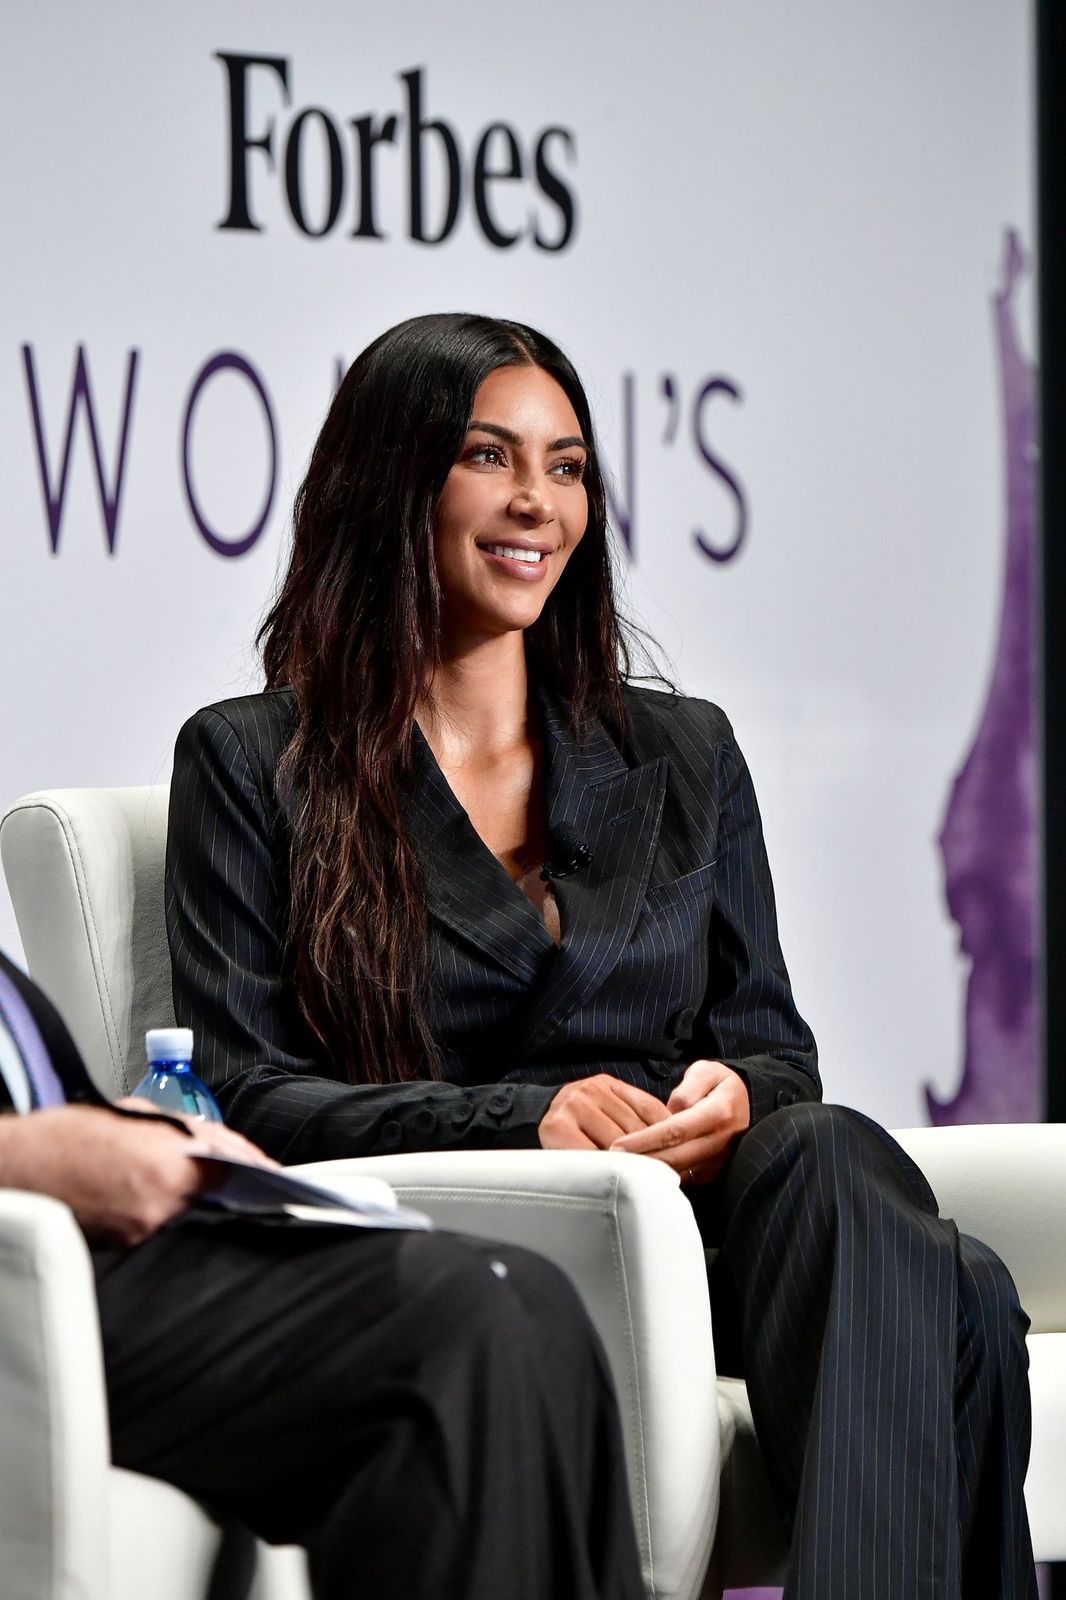 Kim Kardashian during the 2017 Forbes Women's Summit at Spring Studios on June 13, 2017 in New York City. | Photo: Getty Images